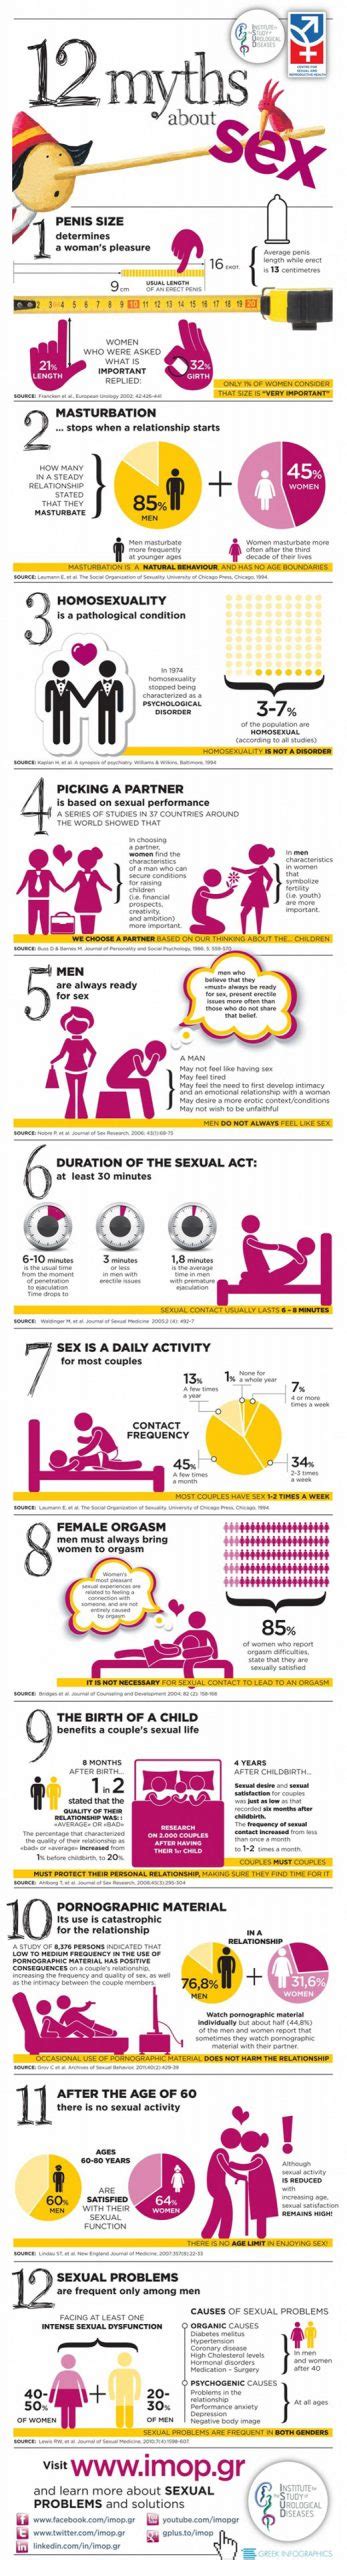 12 Myths About Sex [infographic] Best Infographics